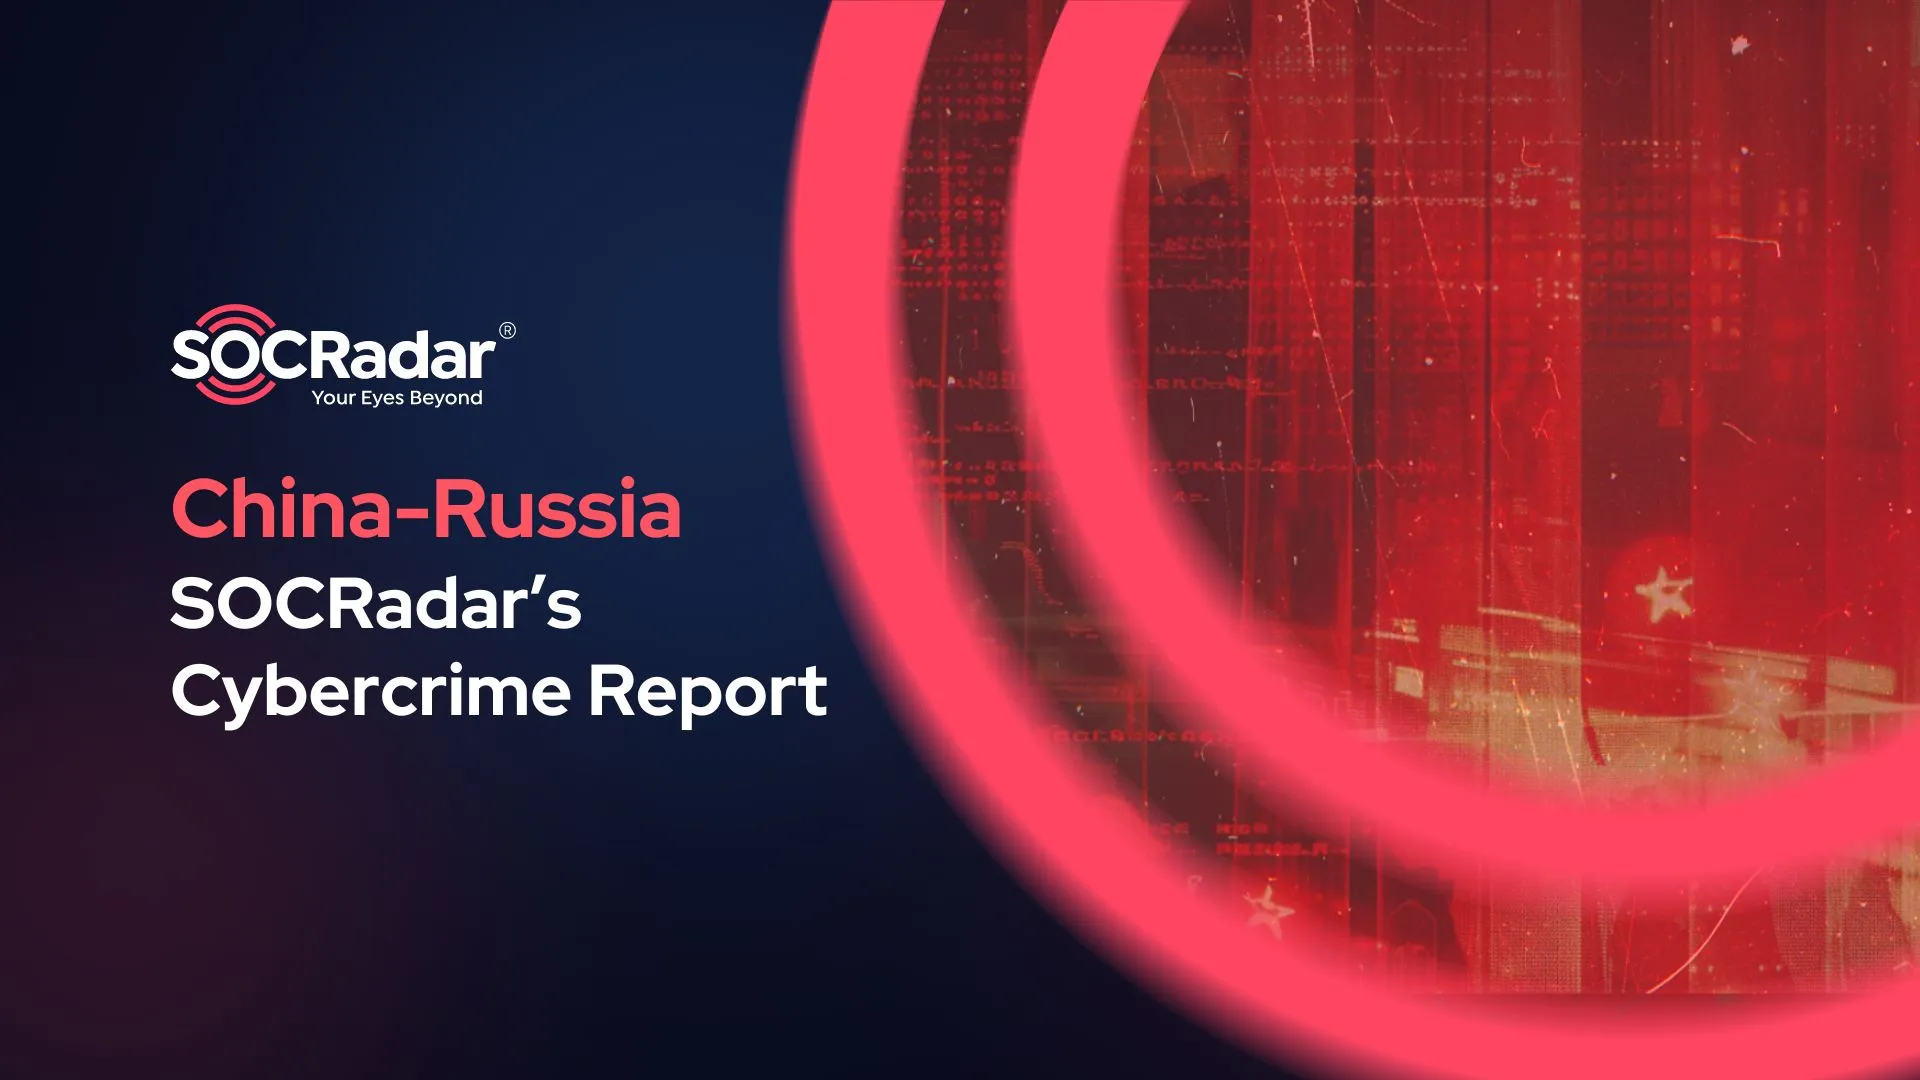 SOCRadar® Cyber Intelligence Inc. | Deciphering Cyber Shadows: Insights into China and Russia’s Cybercrime Ecosystems